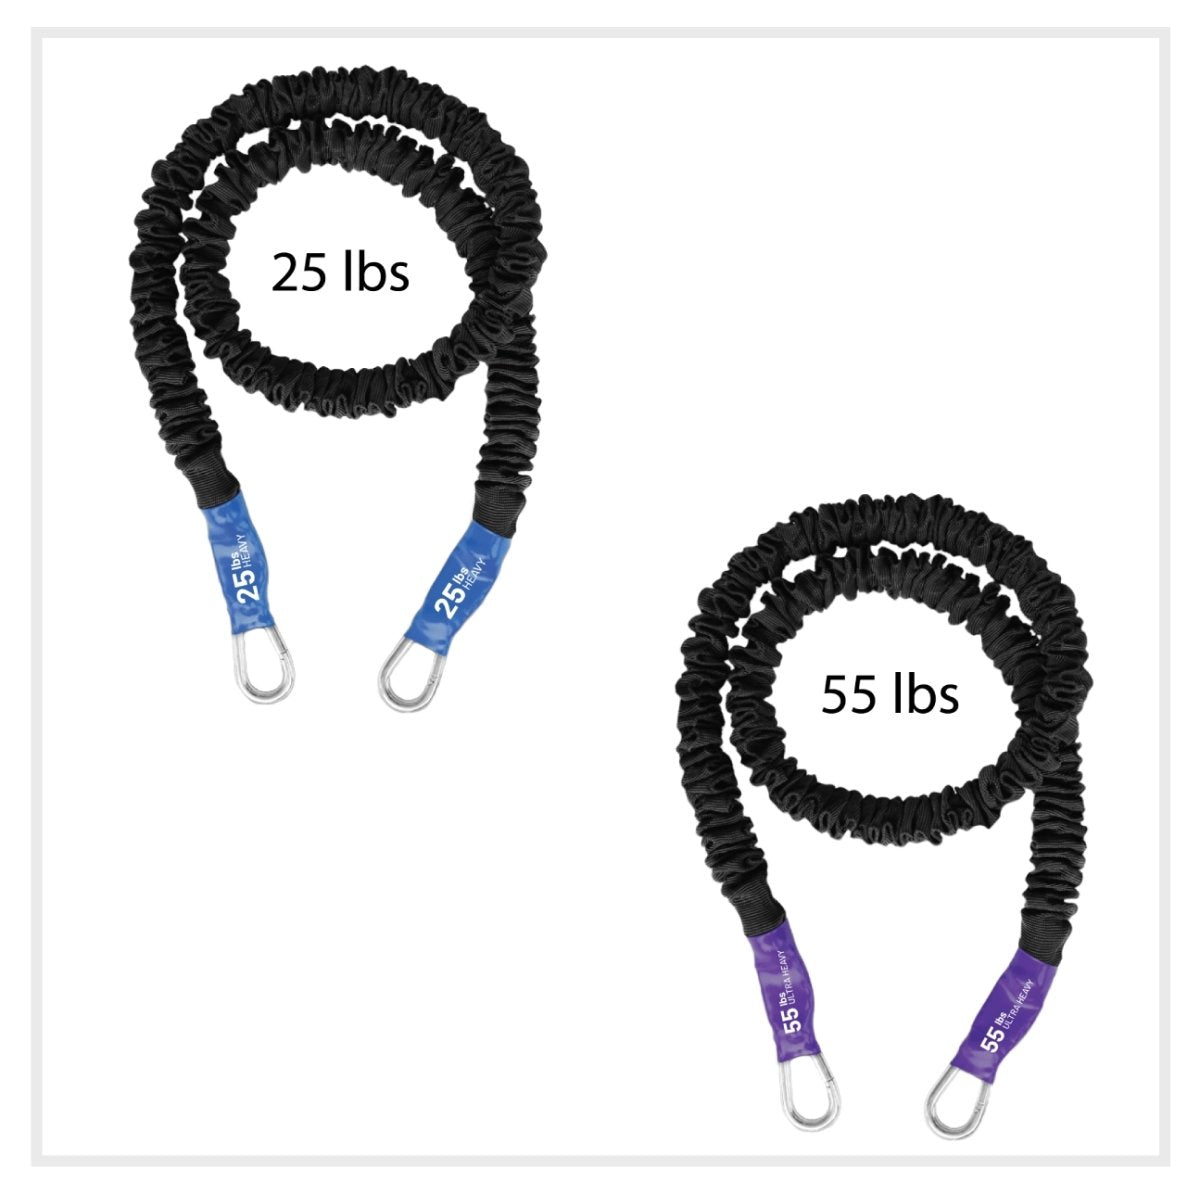 Set of 2 bungee style resistance bands with clips for stacking. Covered for safety and proven to last more than 5 years without snapping. Includes a Heavy 25lb  and a Ultra Heavy 55lb resistance level bands for a total of 80lbs of resistance when stacked. 